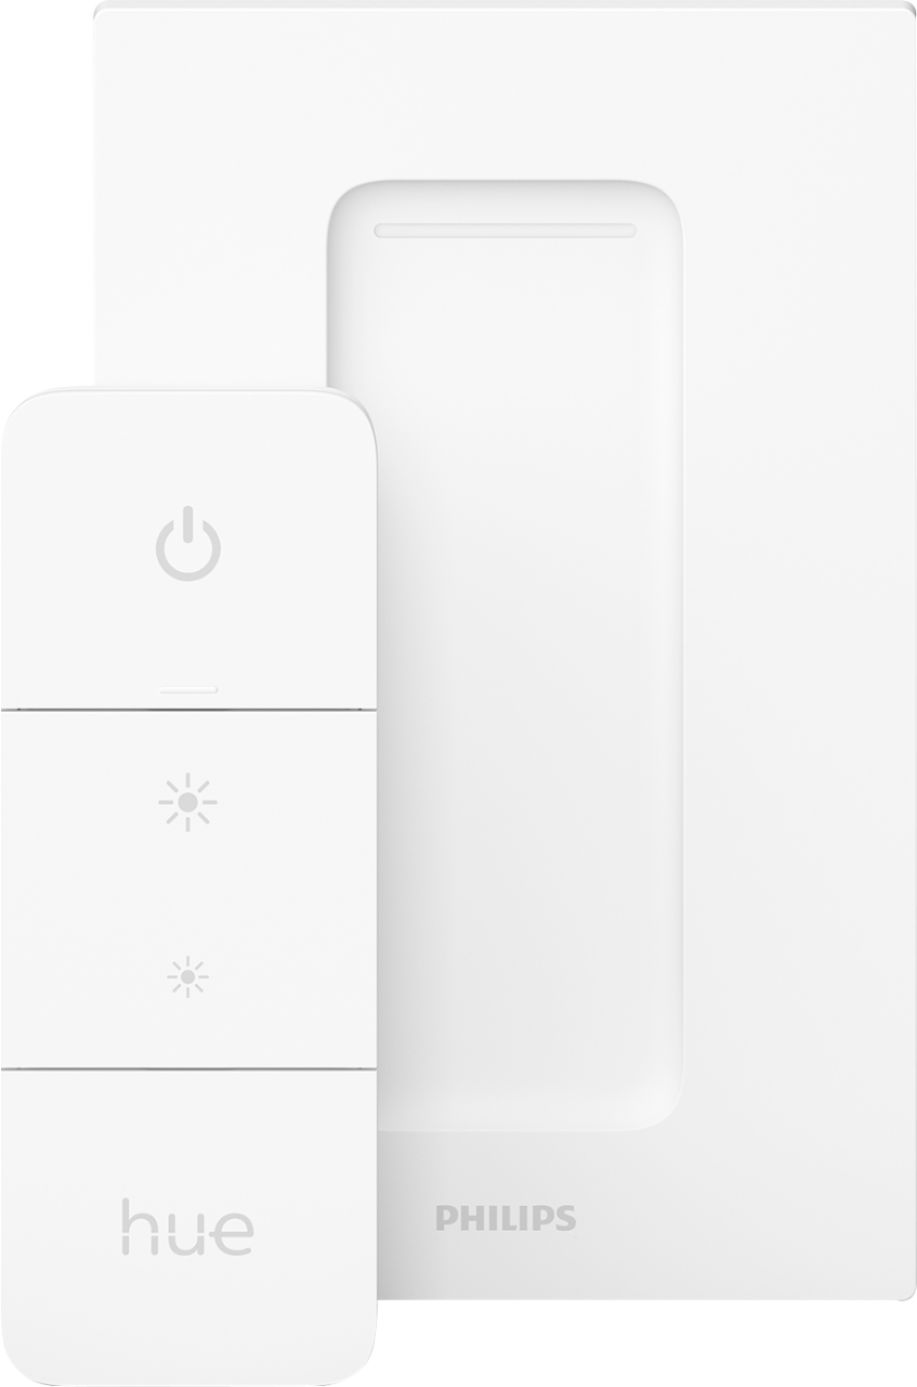 Angle View: Philips - Hue Dimmer Switch - White